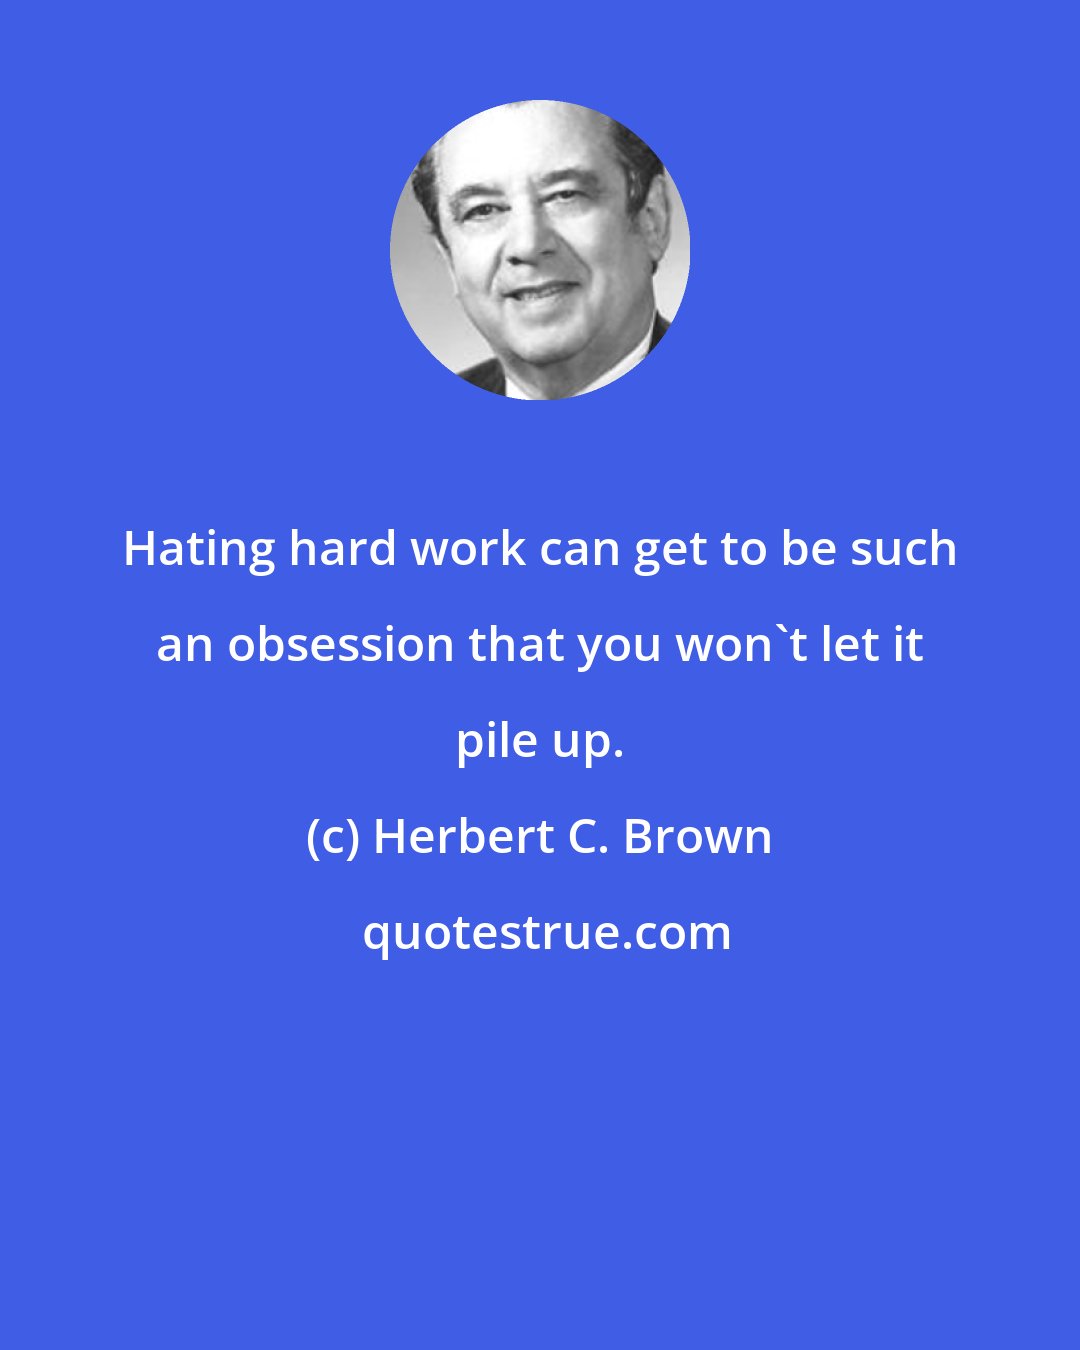 Herbert C. Brown: Hating hard work can get to be such an obsession that you won't let it pile up.